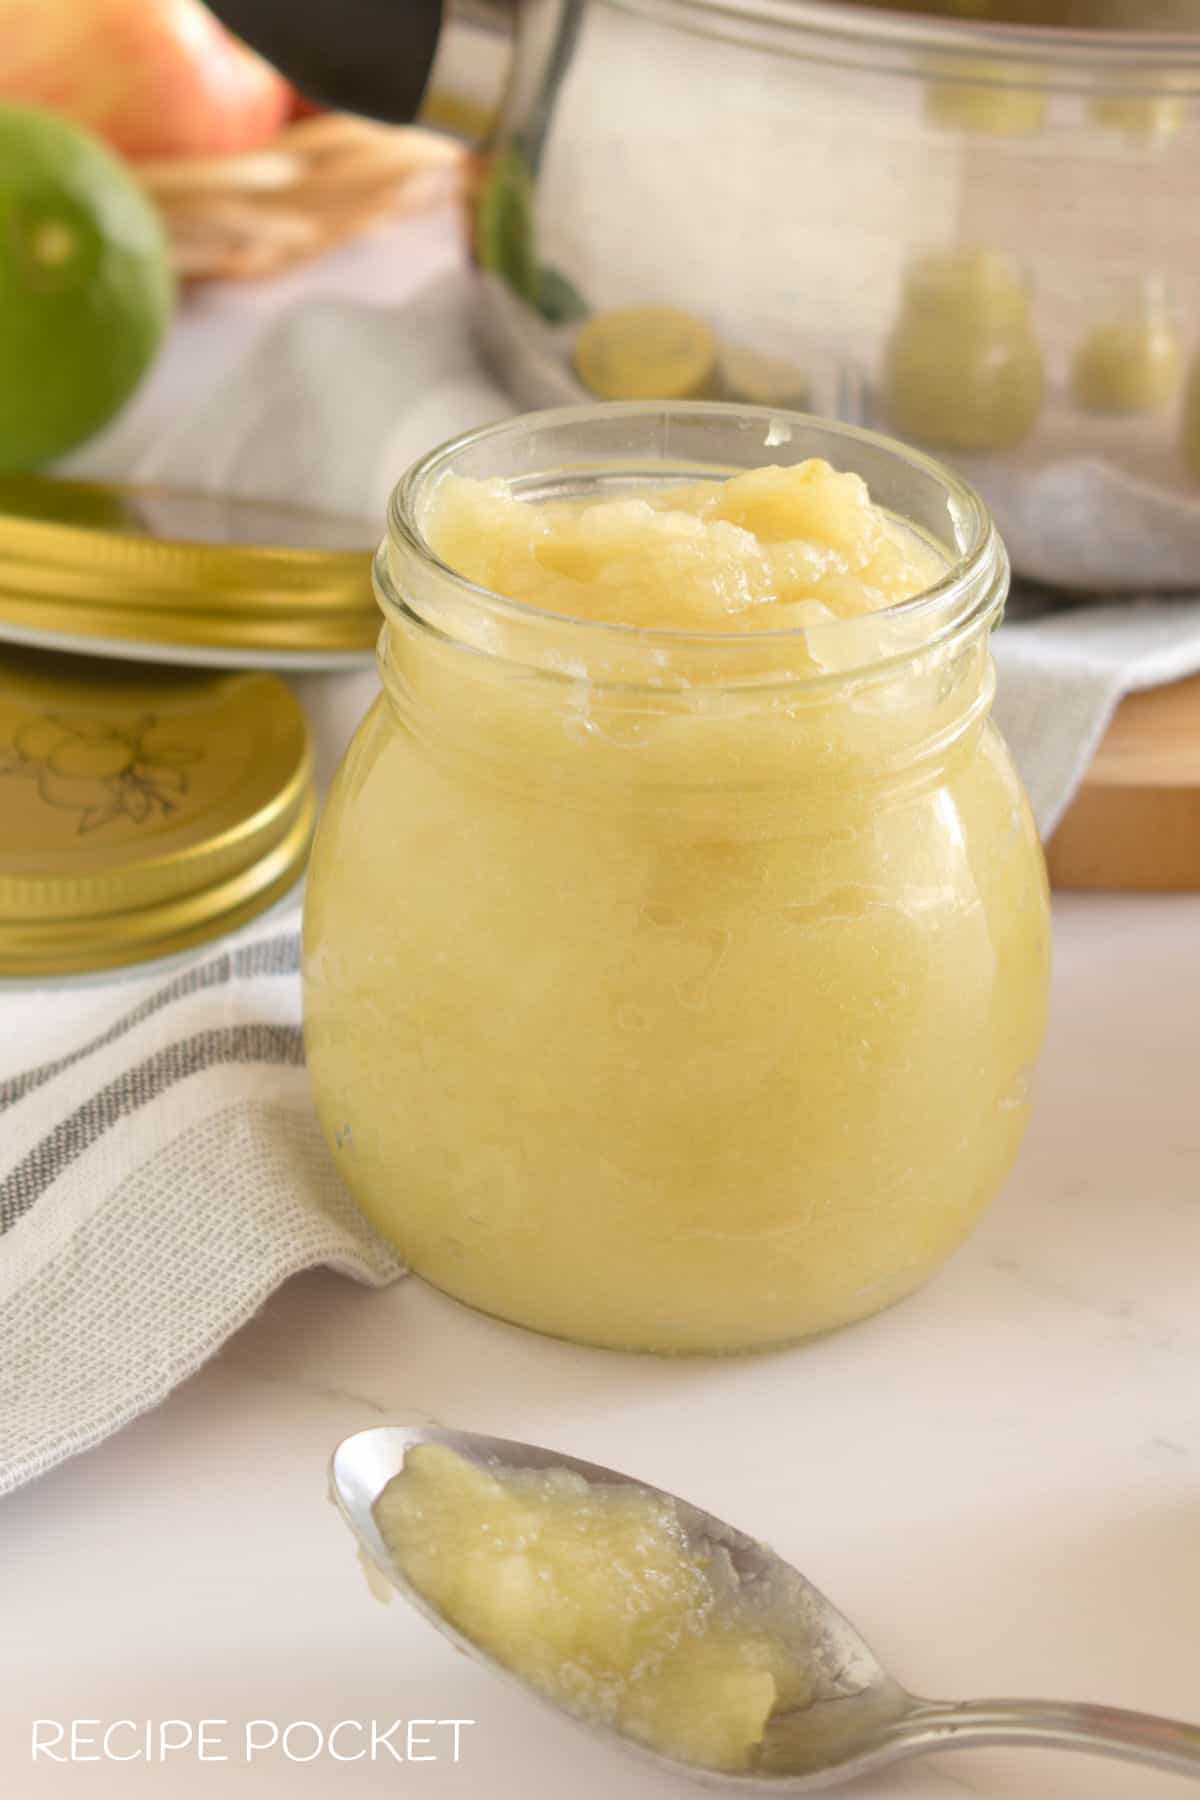 Homemade unsweetened apple sauce in a bottle.